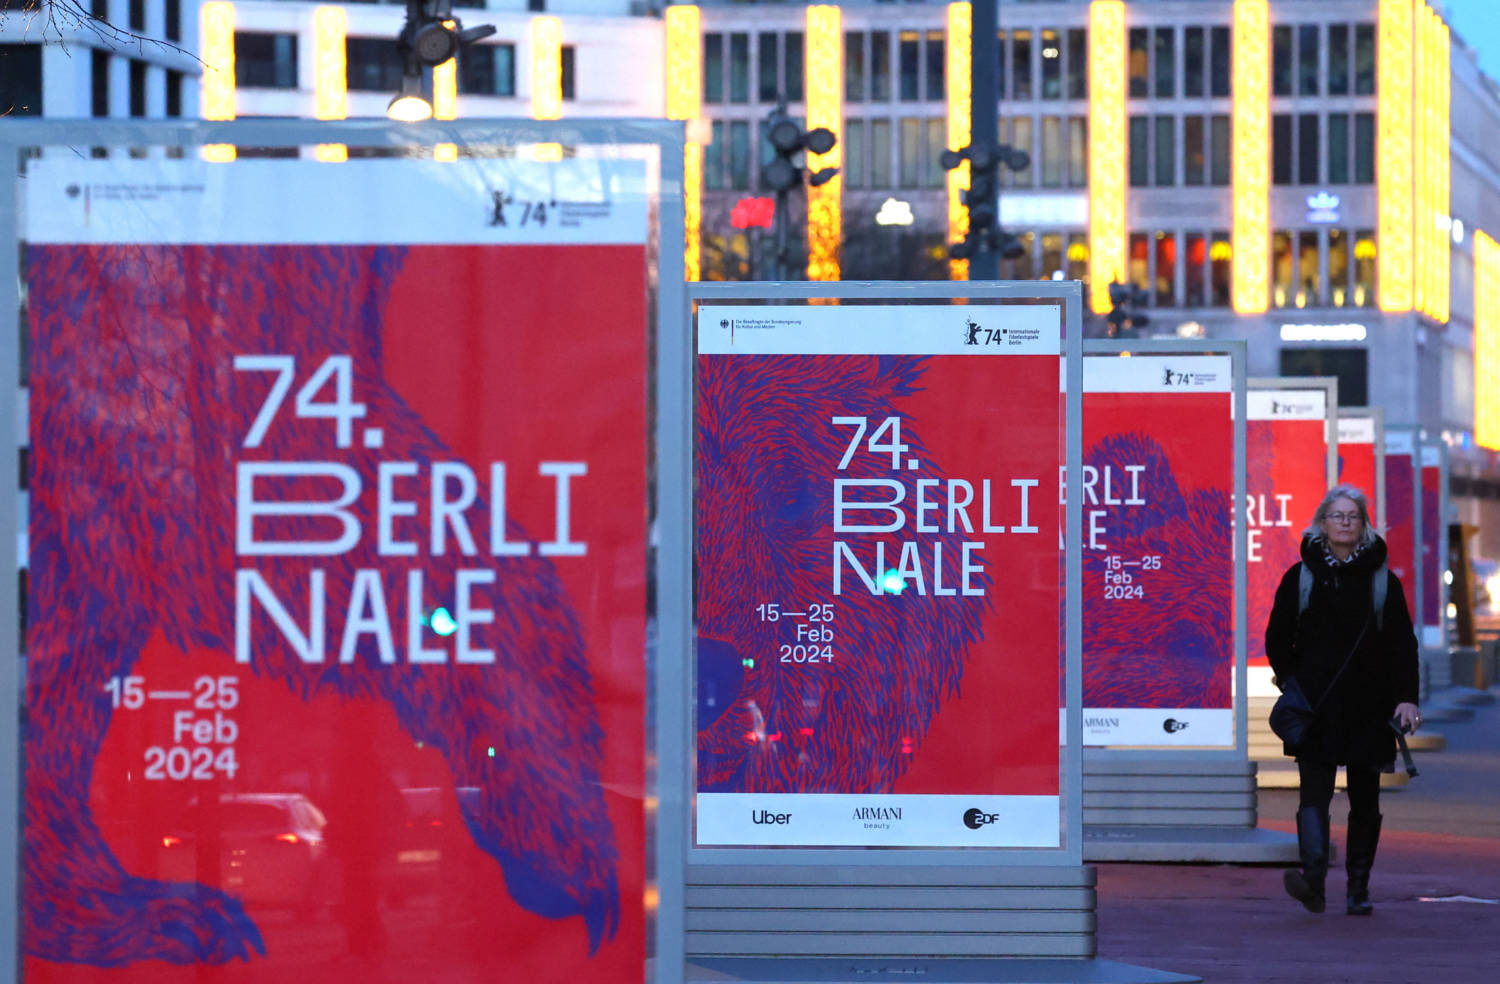 Advertising Billboards For The Upcoming 74th Berlinale International Film Festival In Berlin